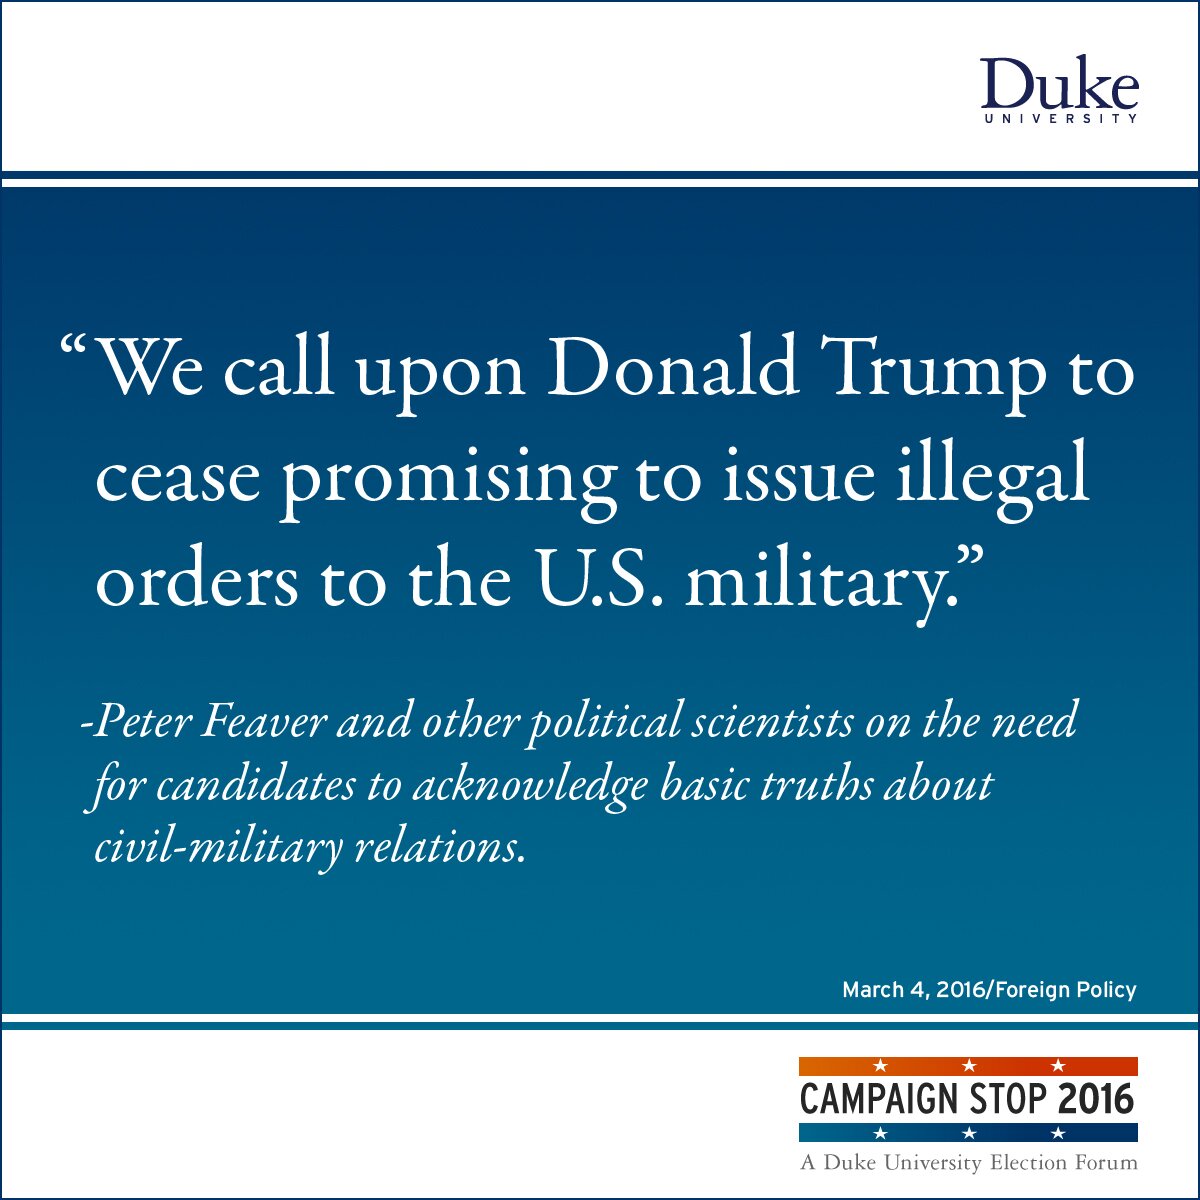 “We call upon Donald Trump to cease promising to issue illegal orders to the U.S. military.” -Peter Feaver and other political scientists on the need for candidates to acknowledge basic truths about civil-military relations.